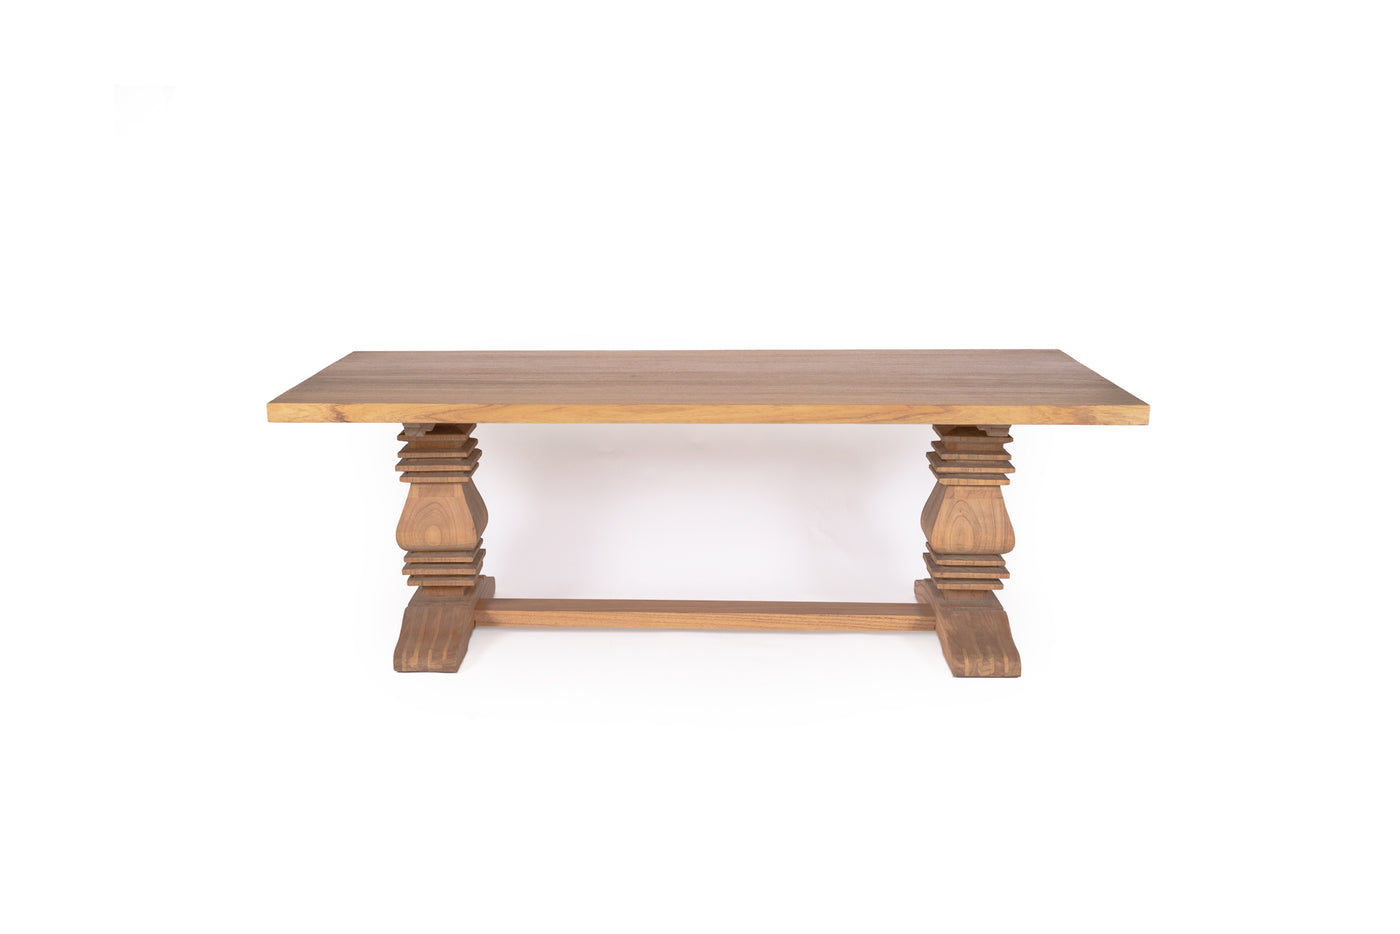 Clearwater Pedestal Table - 400cm